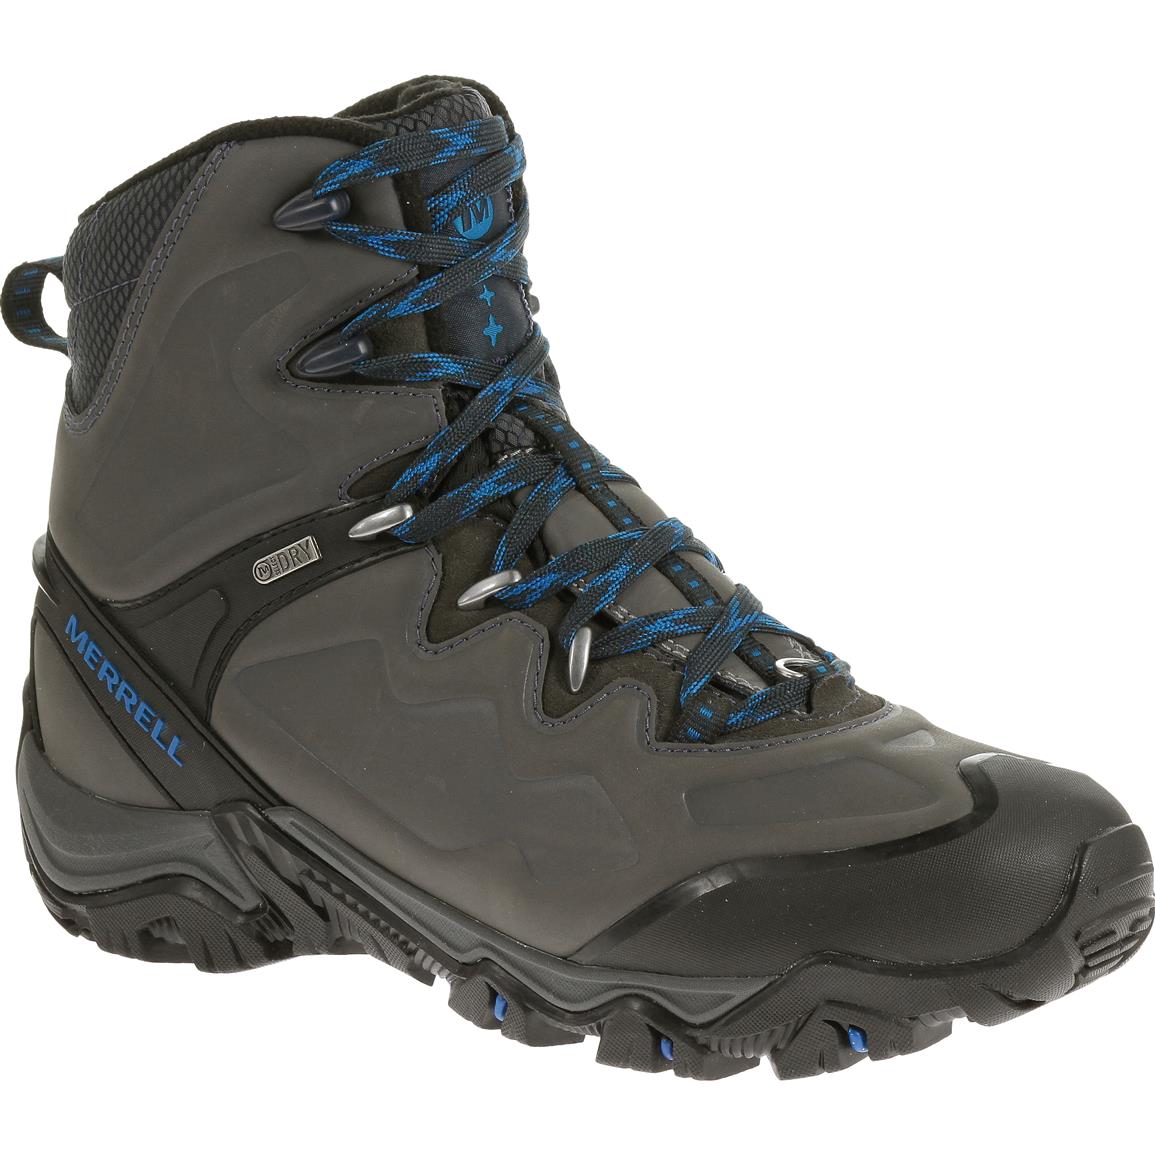 Merrell Polarand Winter Hiking Boots, Waterproof, Insulated, 8" 654067, Hiking Boots & Shoes